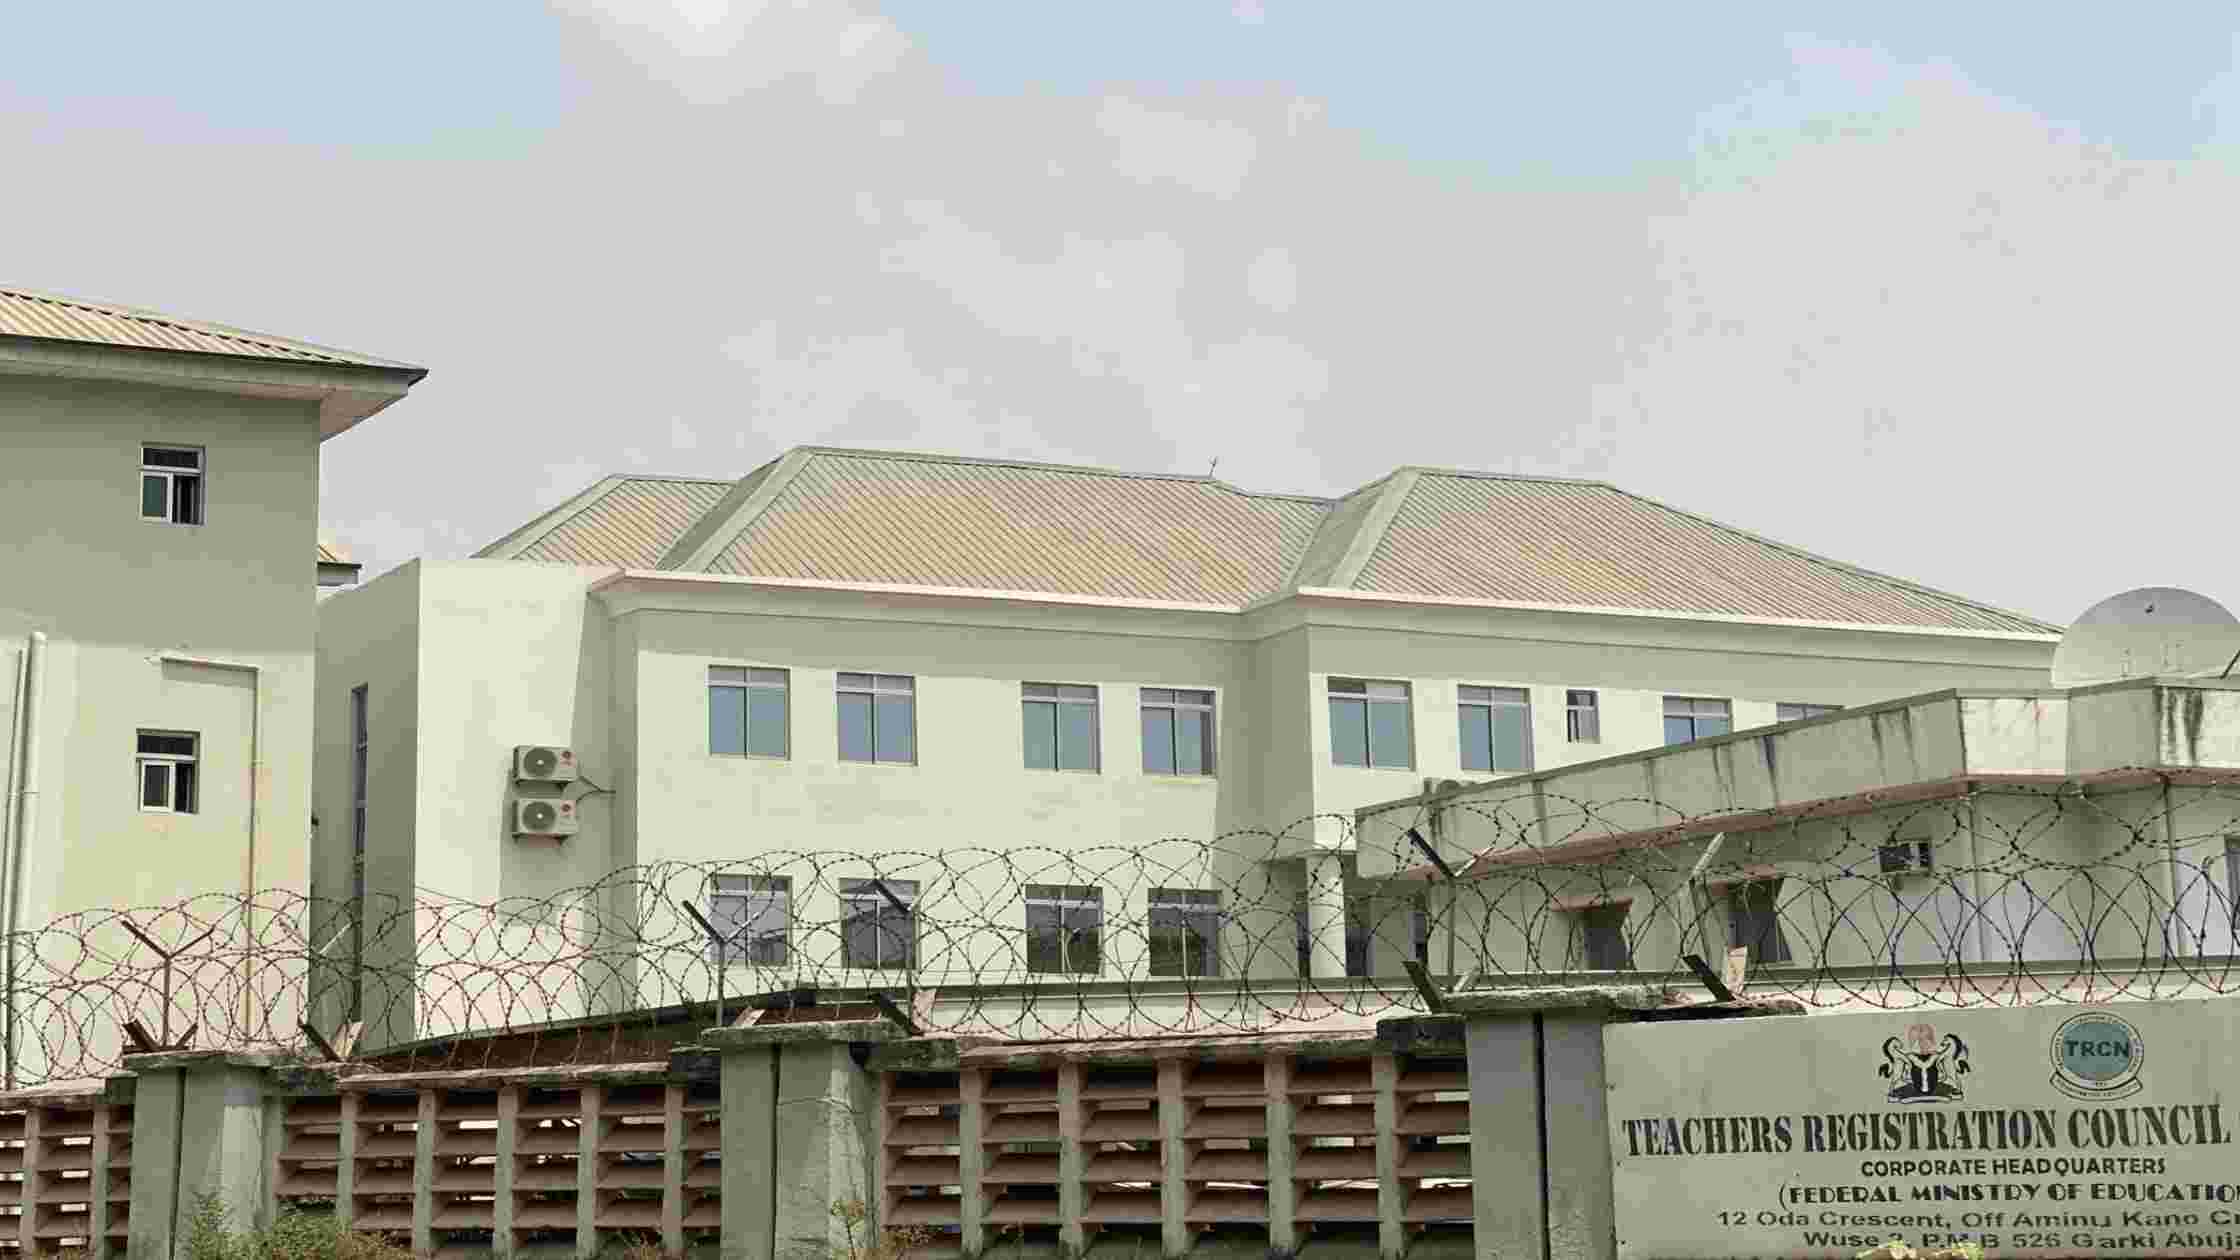 trcn offices nationwide